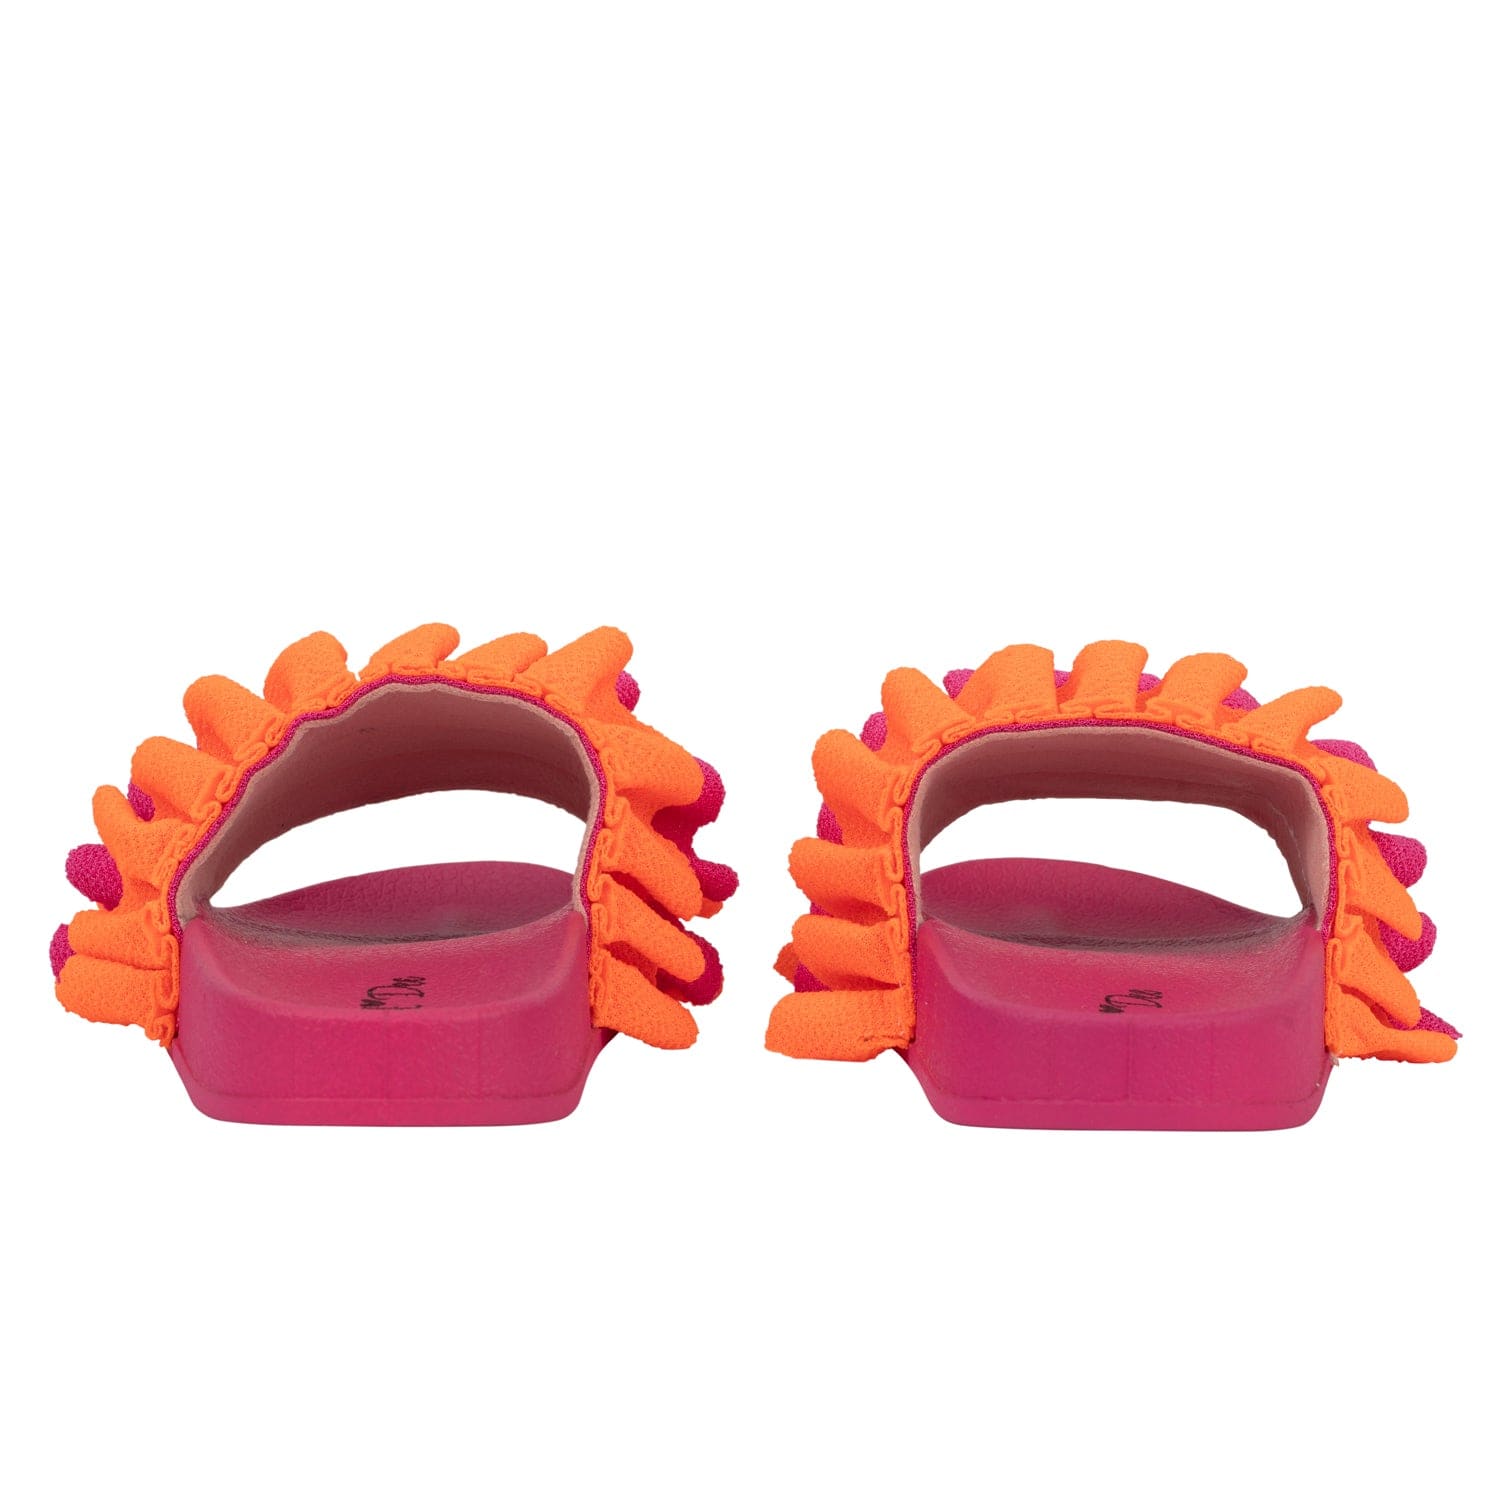 A DEE - Frilly Bold Hearts Frill Sliders - Hot Pink